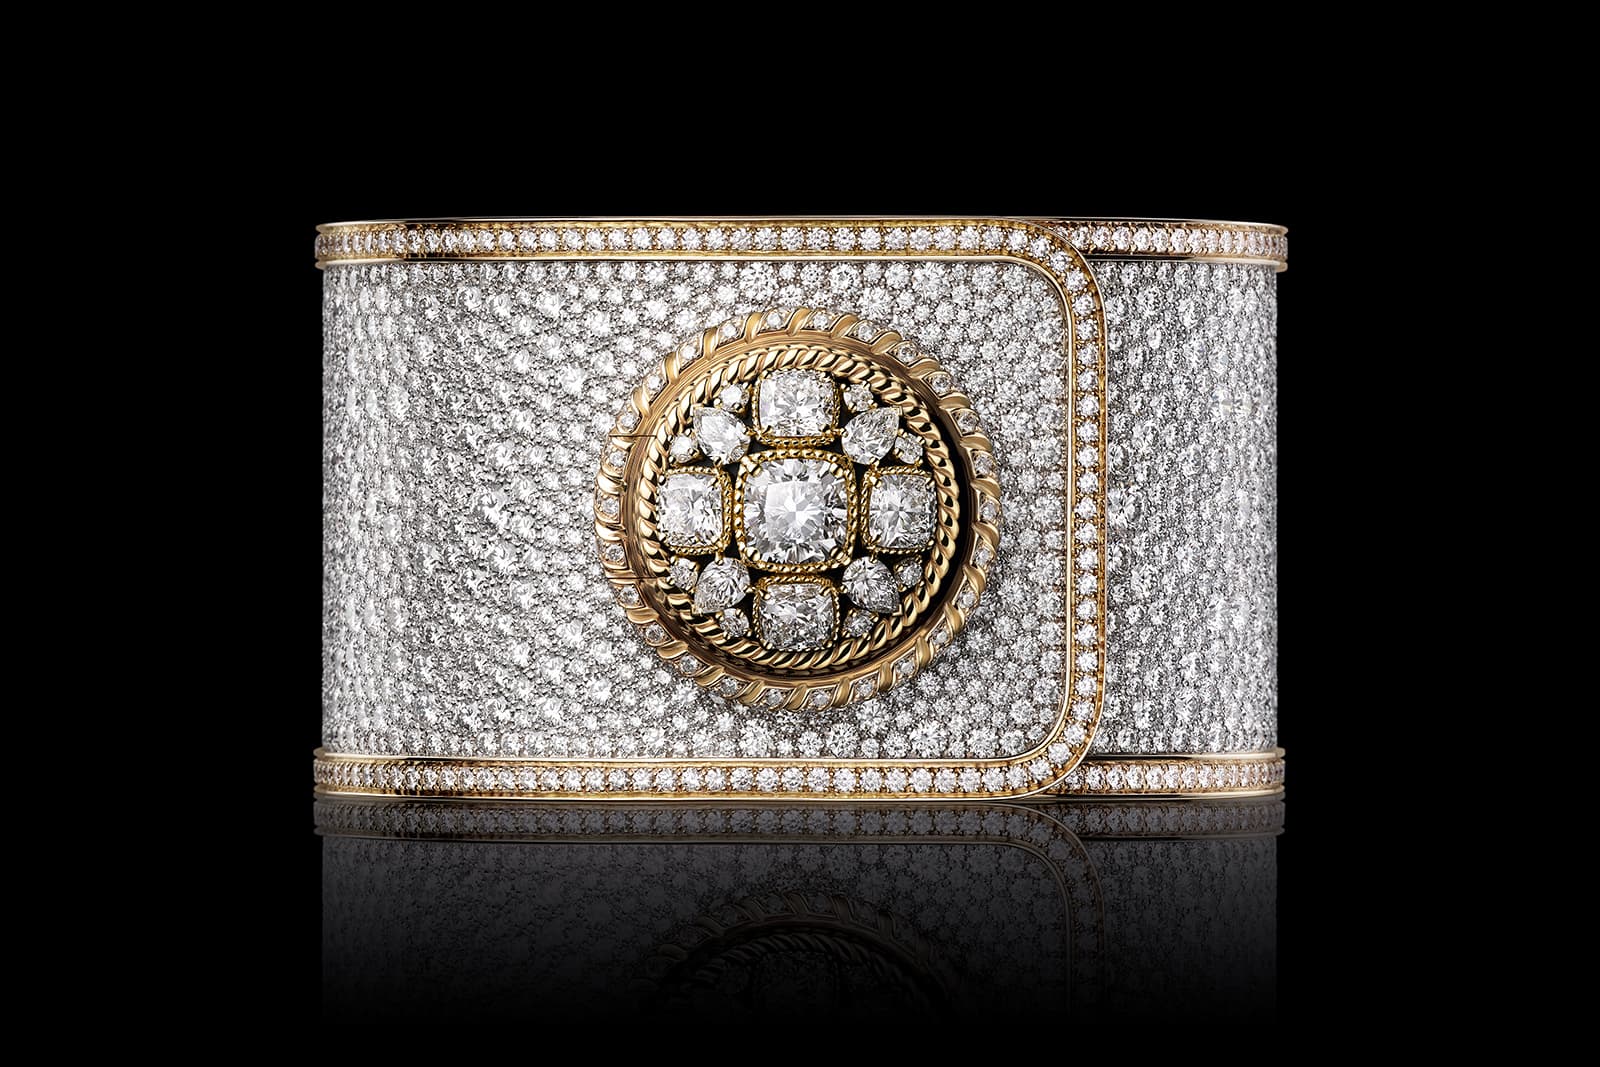 One of a kind: the Chanel Mademoiselle Privé Bouton Serti Neige secret watch